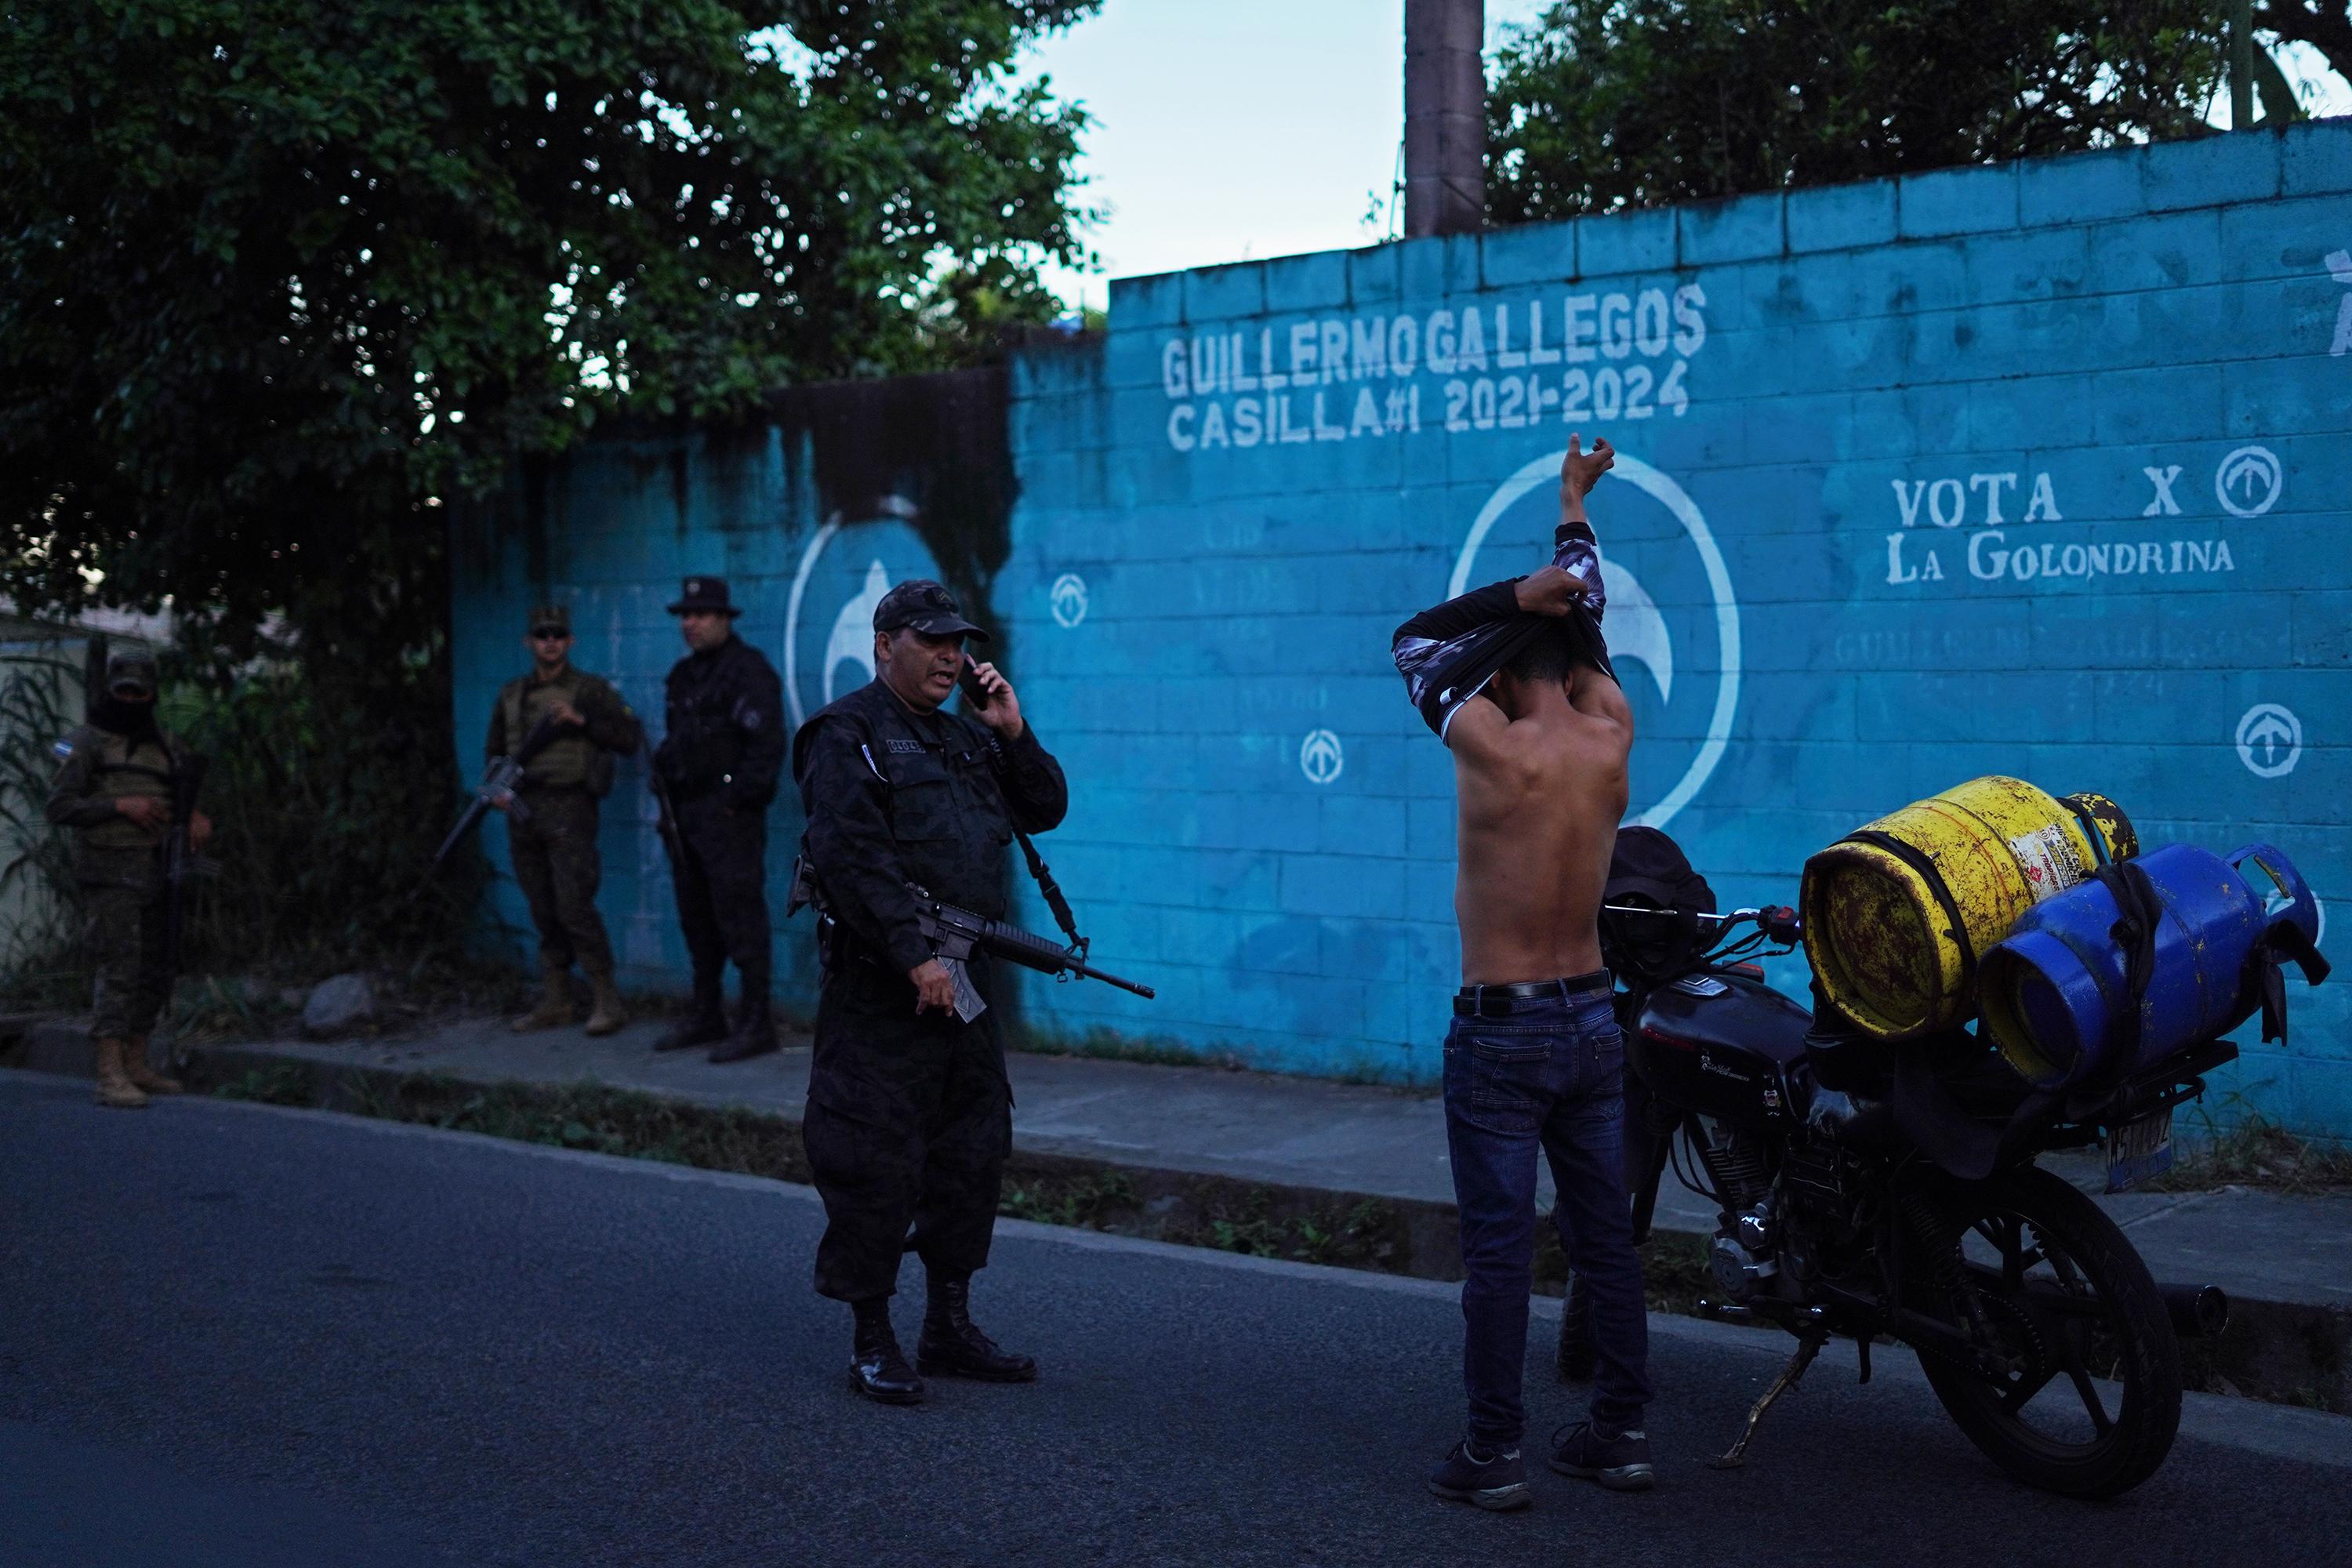 On December 2, 2022, the Salvadoran police and military deployed to Las Margaritas and Las Campaneras, long considered two of the most dangerous communities in Soyapango. All of the people in the streets were stopped and searched, like this man, who was forced to prove that he did not have hidden tattoos. Photo: Víctor Peña/El Faro